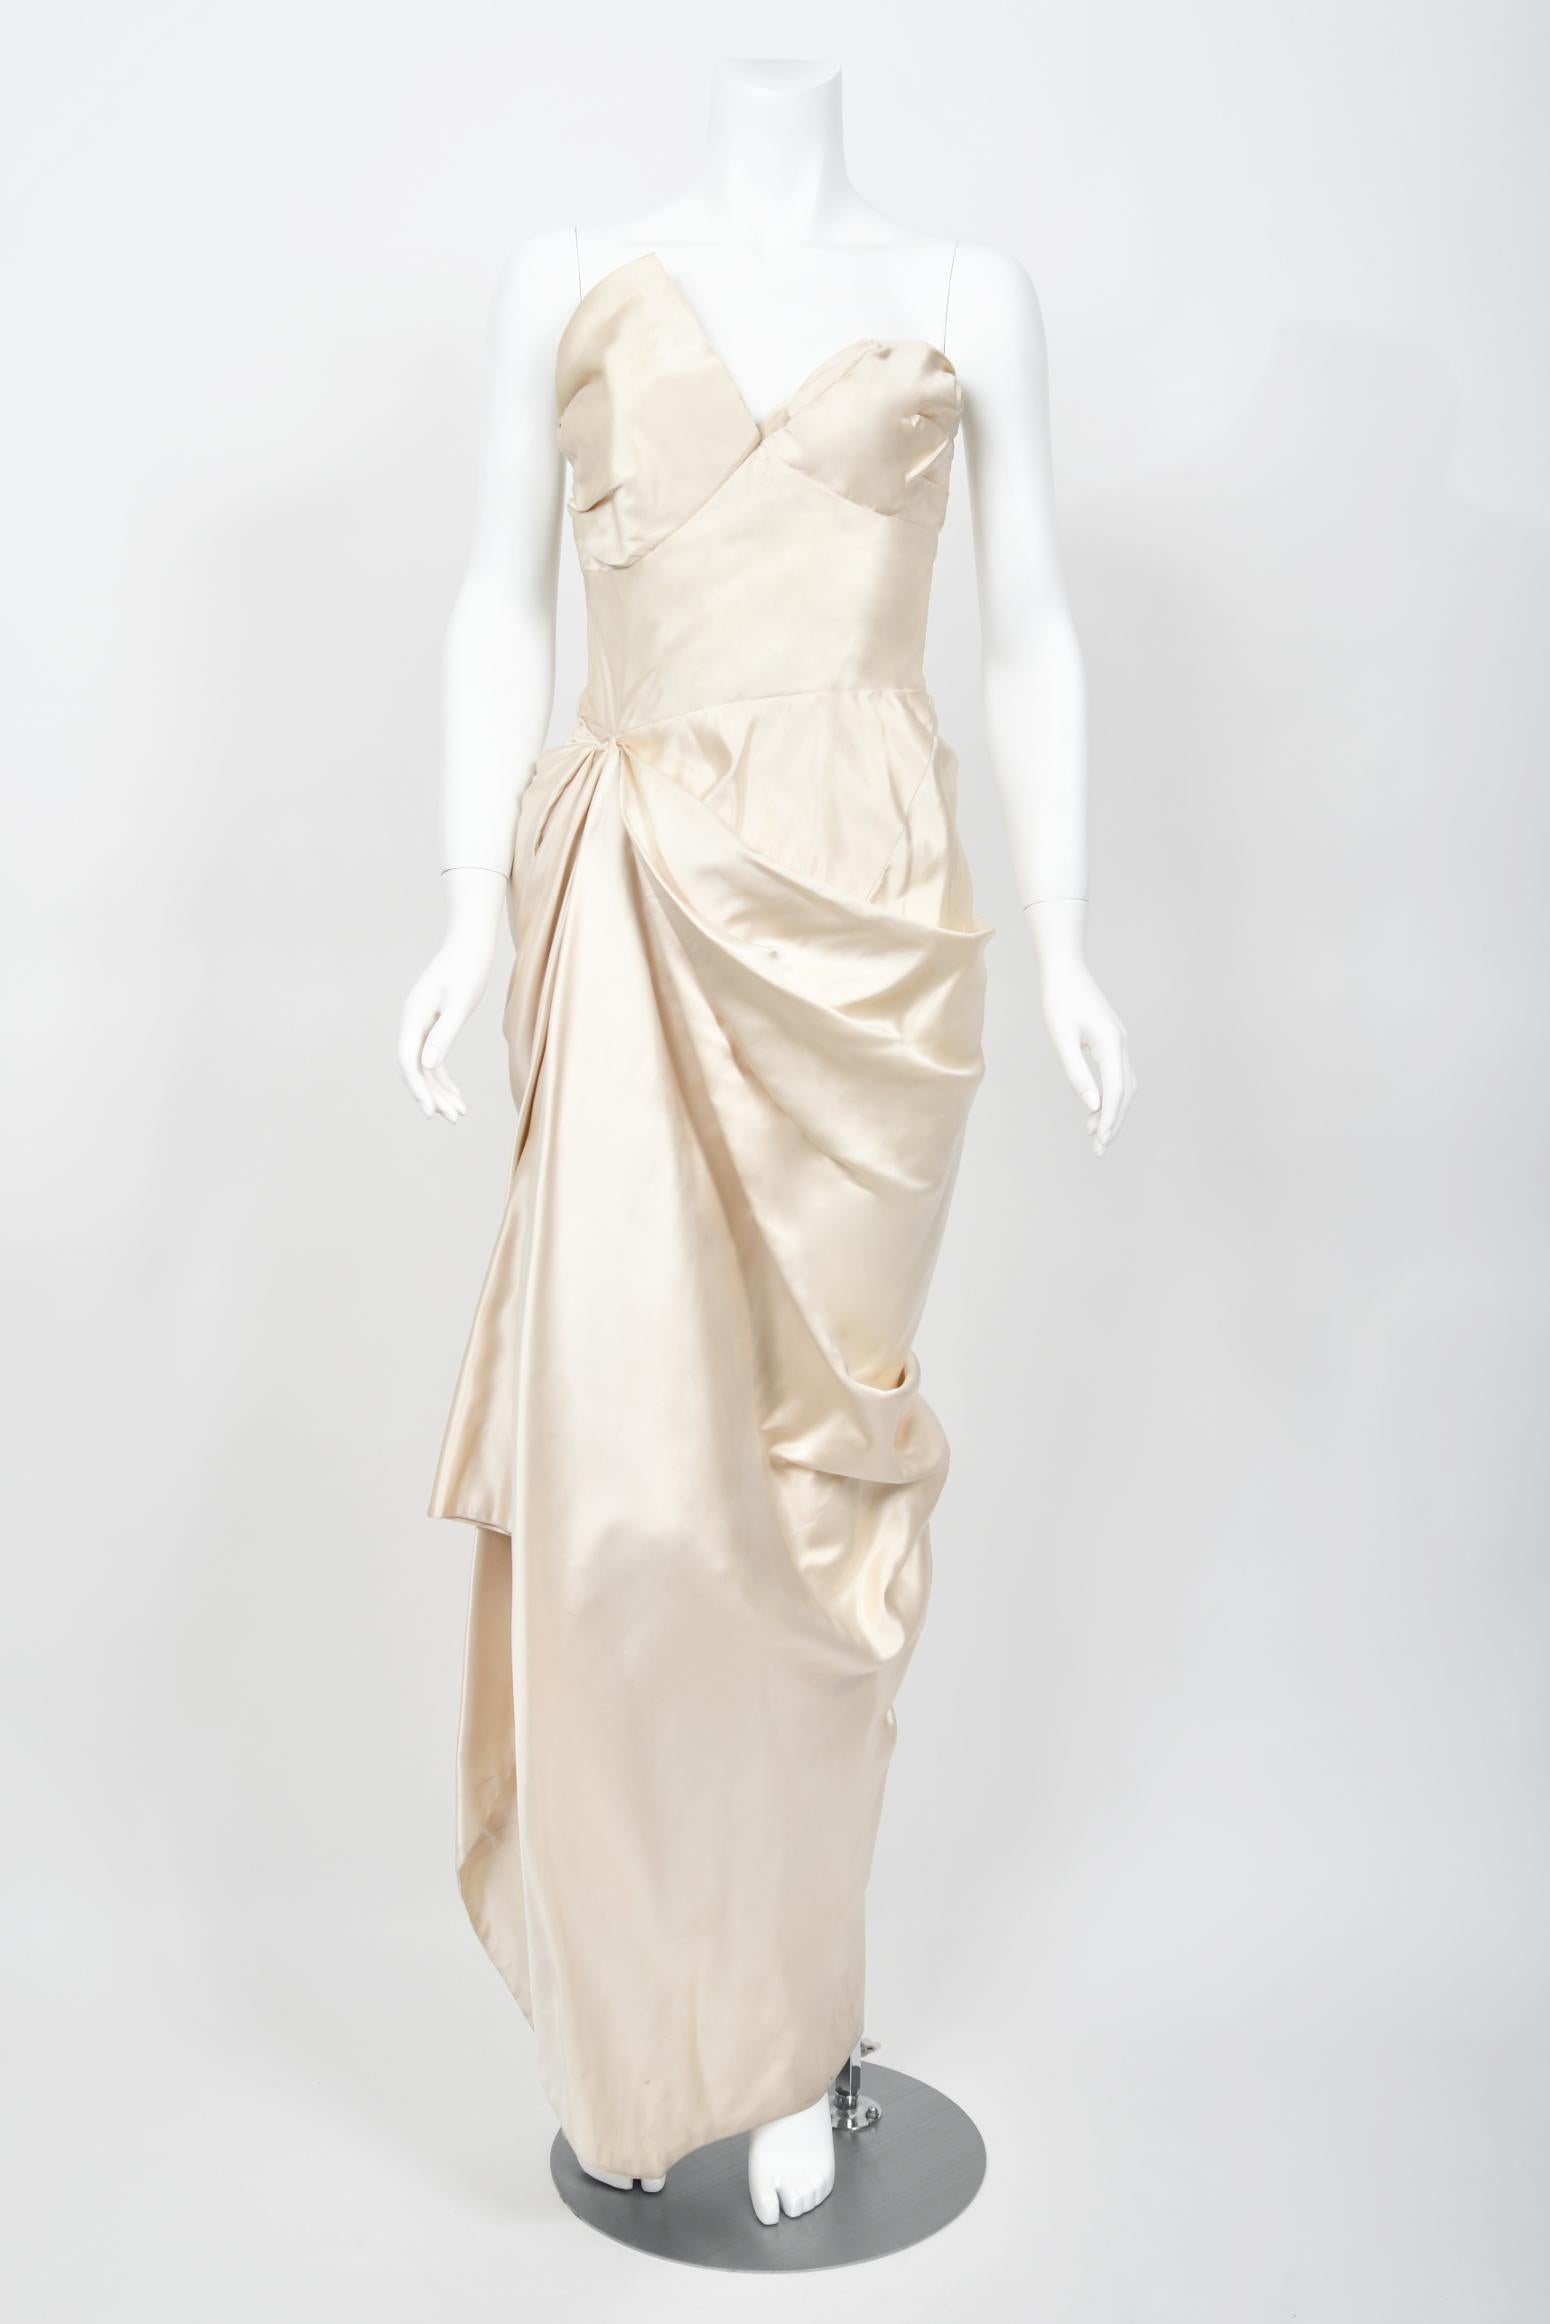 1949 Jeanne Lanvin Haute Couture Ivory Silk Satin Strapless Draped Bridal Gown  For Sale 2